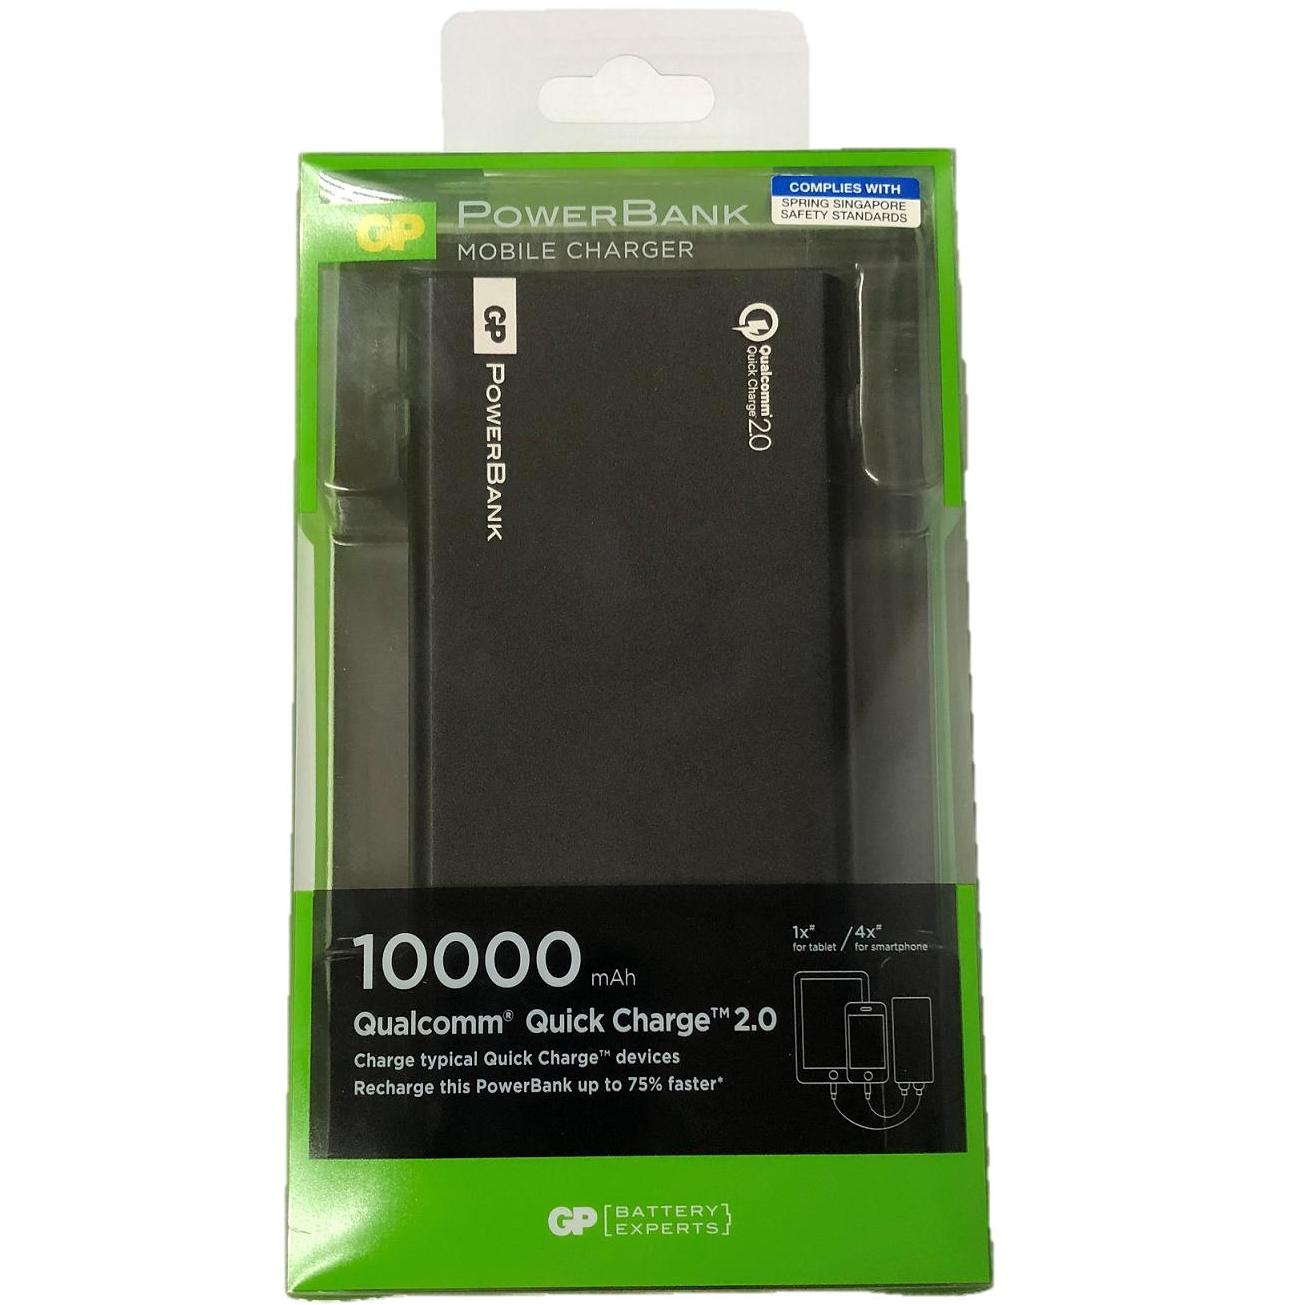 GP PowerBank Mobile Charger Complies with Spring Singapore Safety Standards 10000 mAh